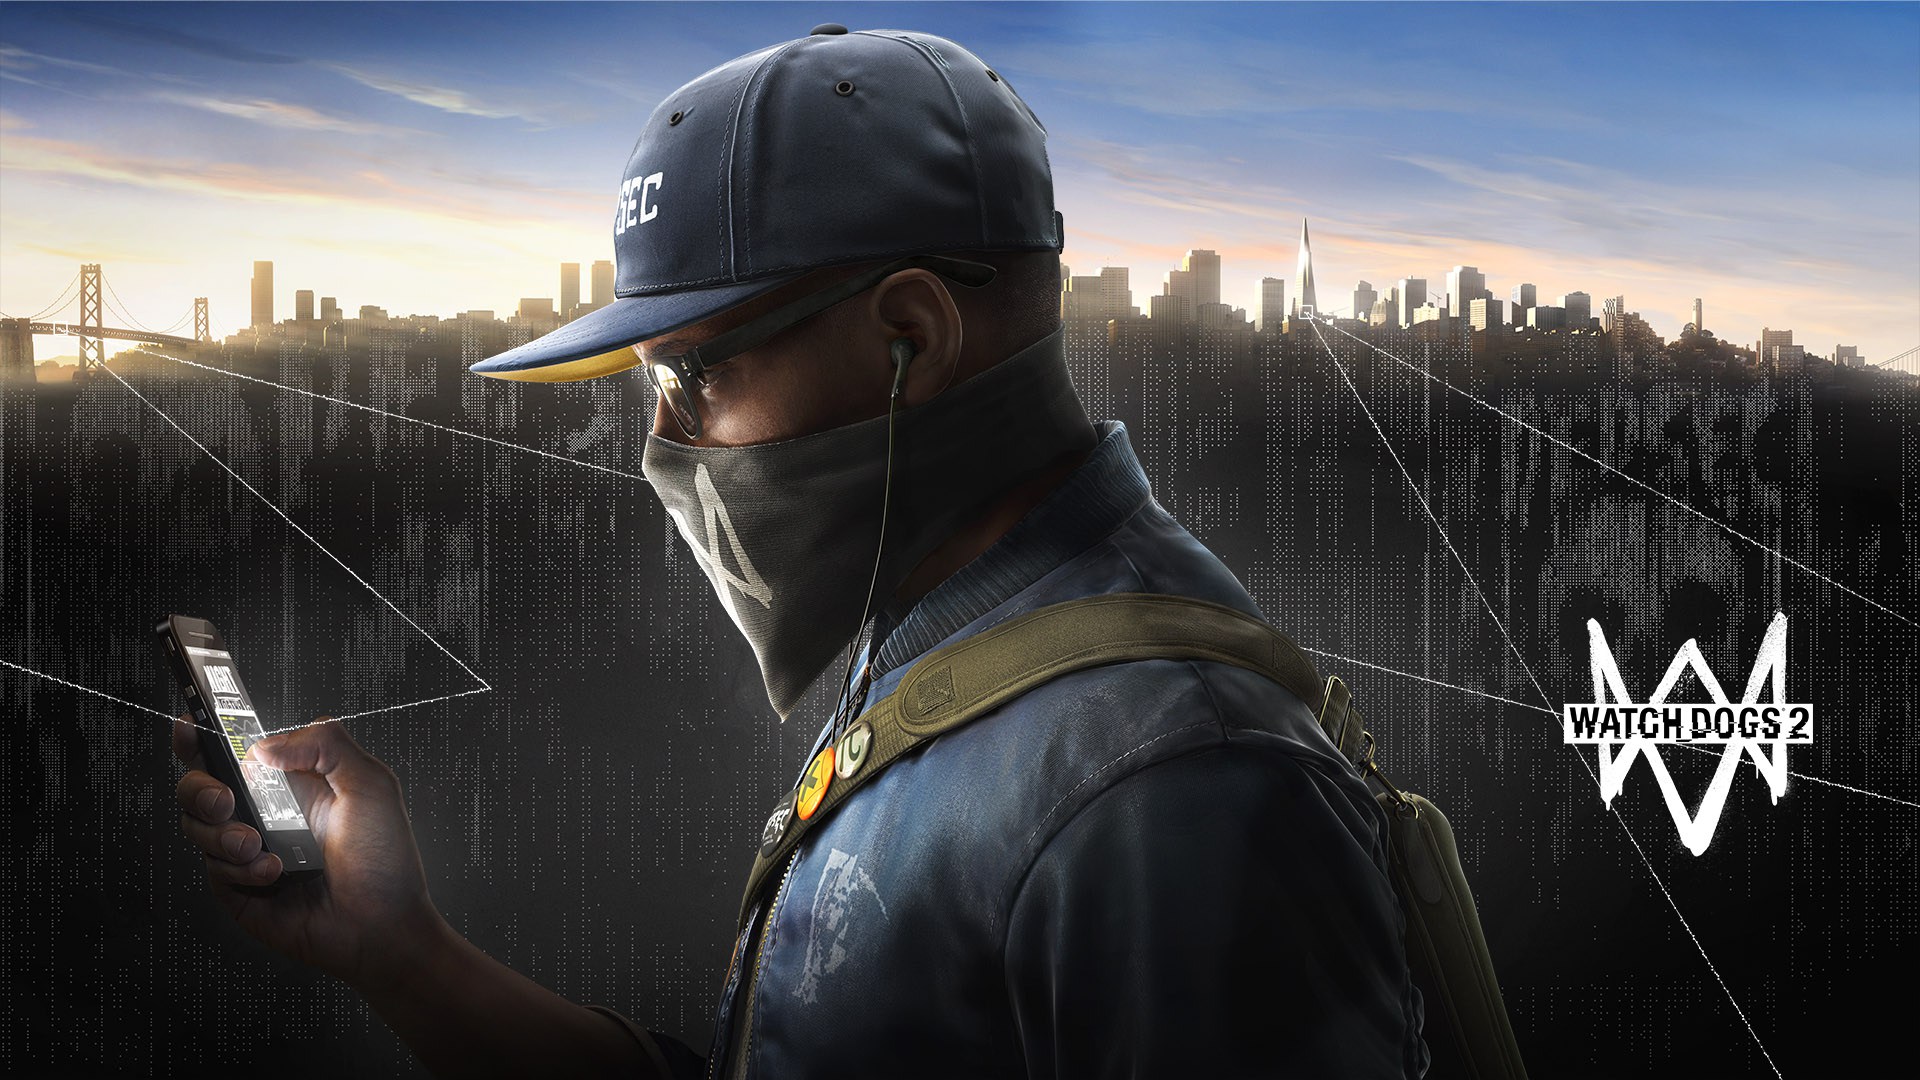 Watch Dogs 2 #1